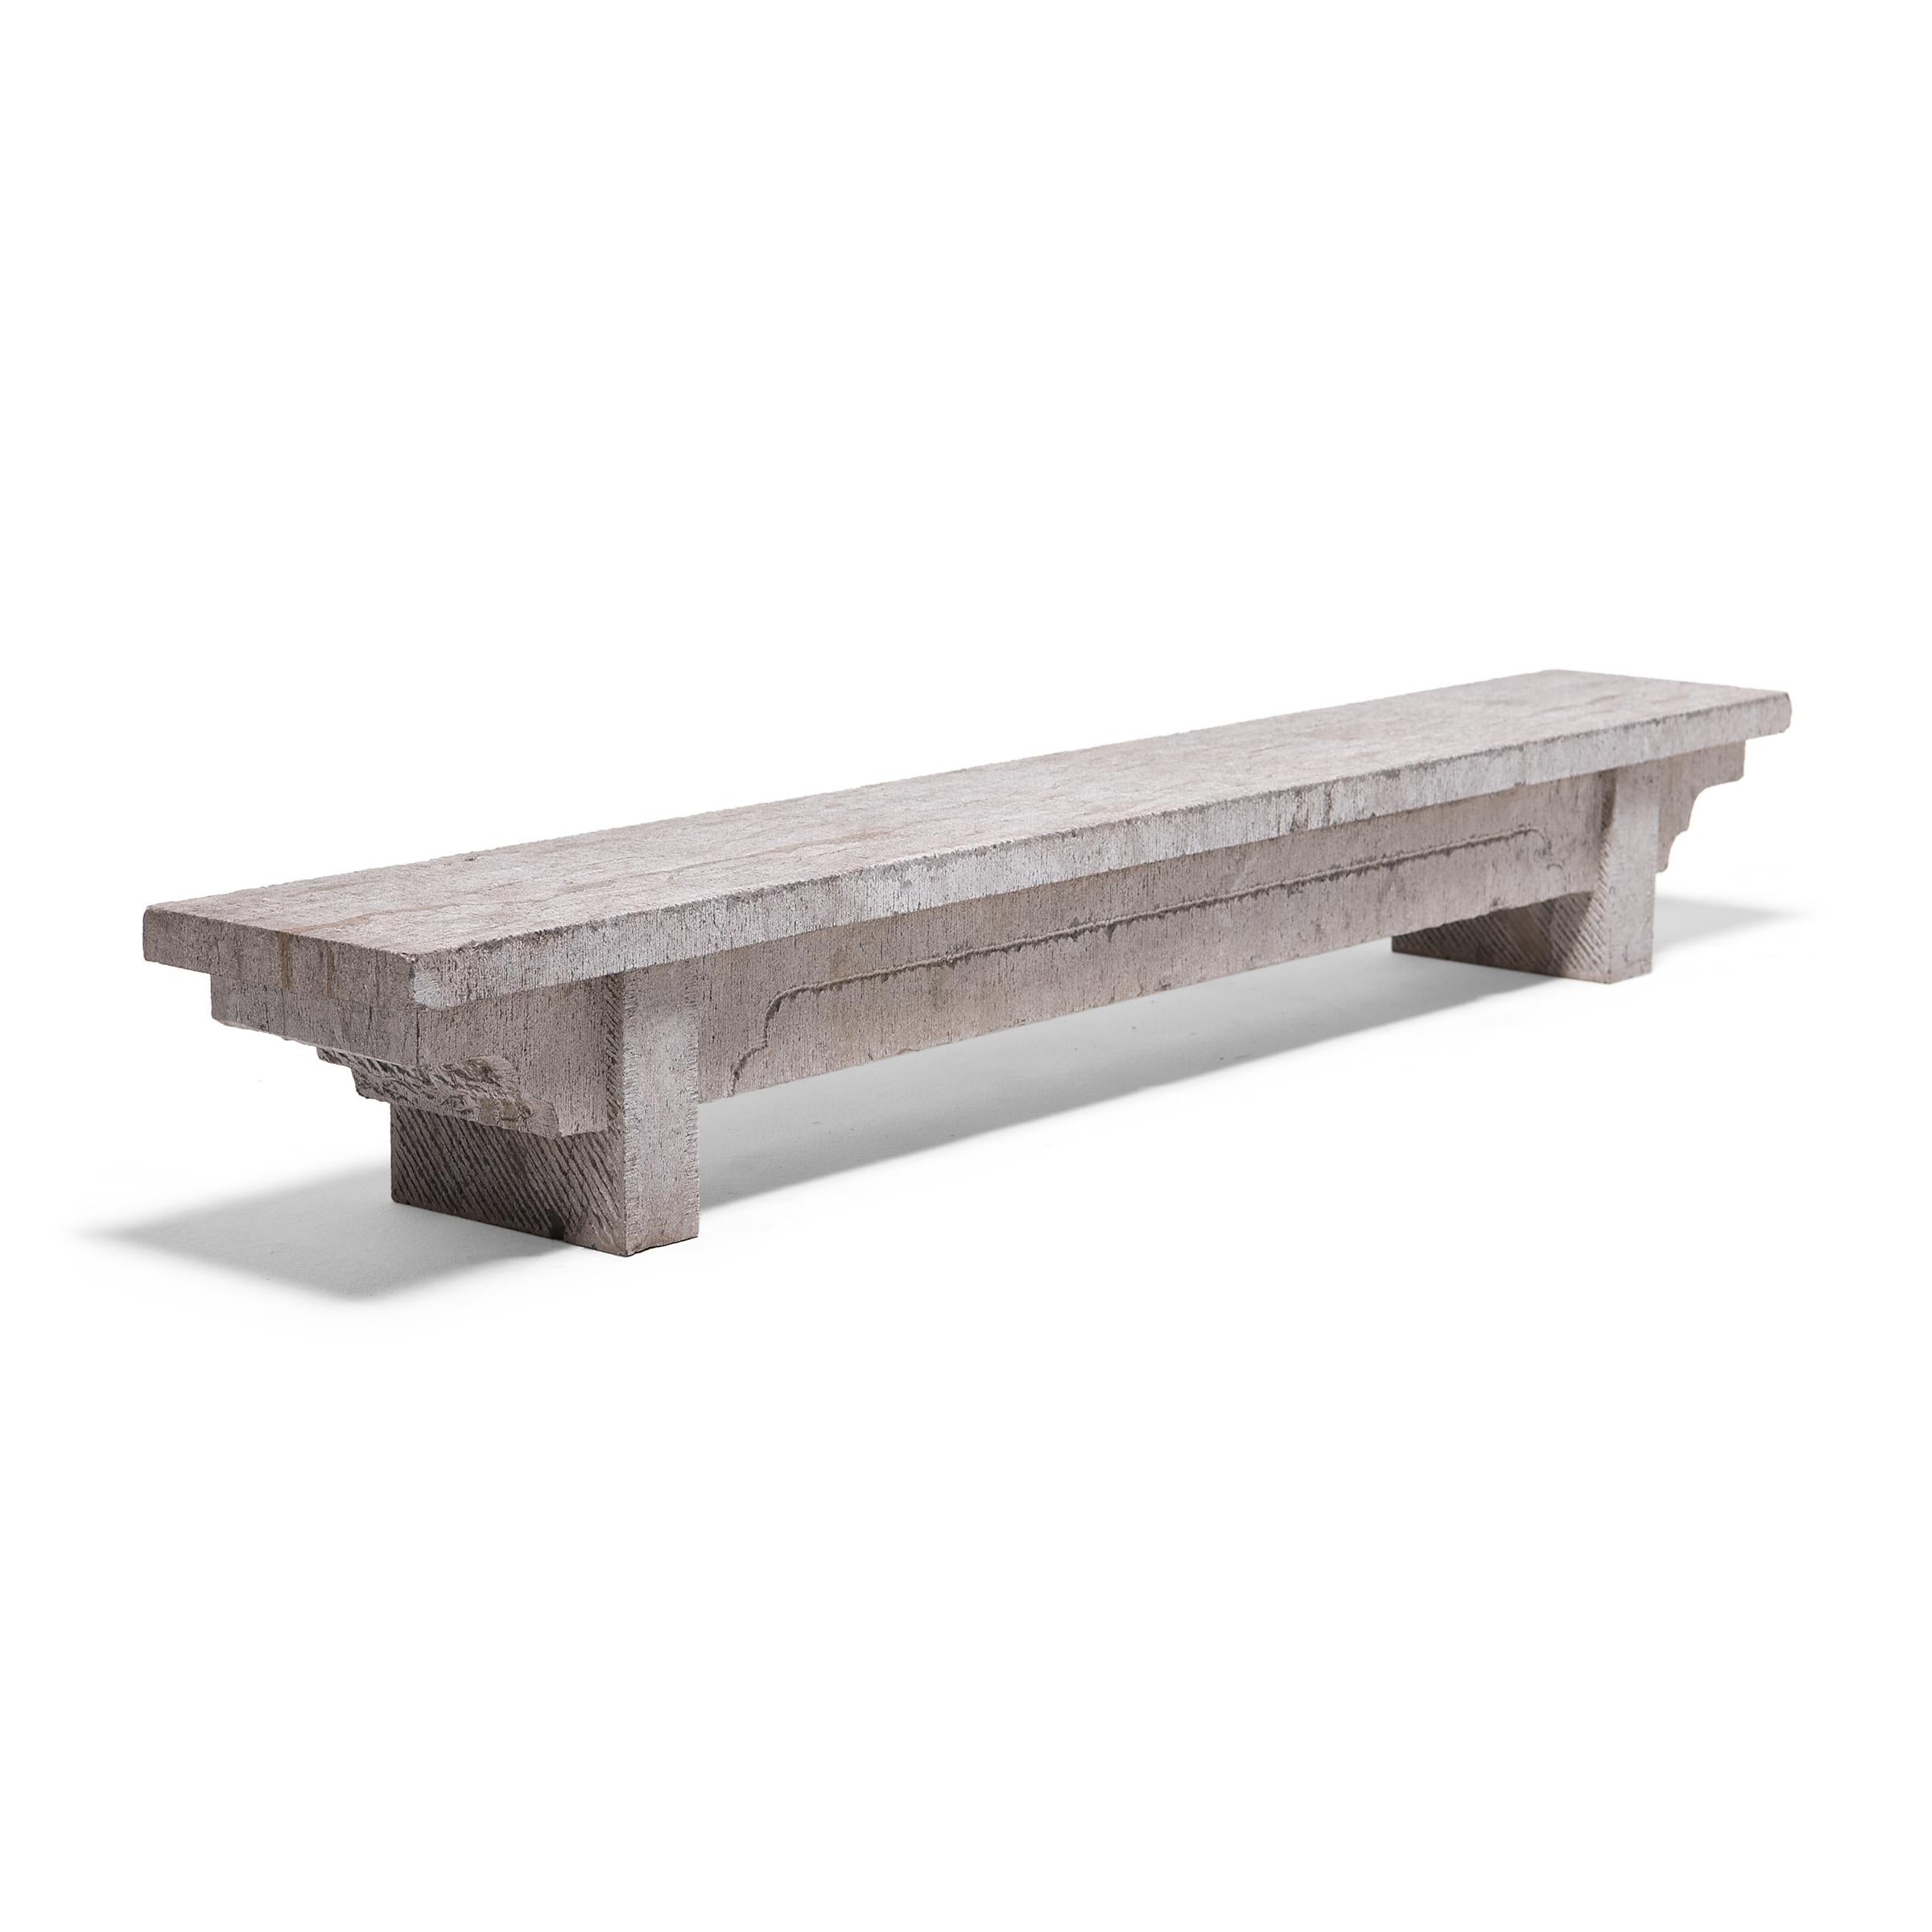 This simply designed doon bench from China's Shanxi province is carved by hand from a single block of limestone. With a strong, low profile and subtle stepped spandrels, the bench honors the balanced proportions and minimal forms characteristic of